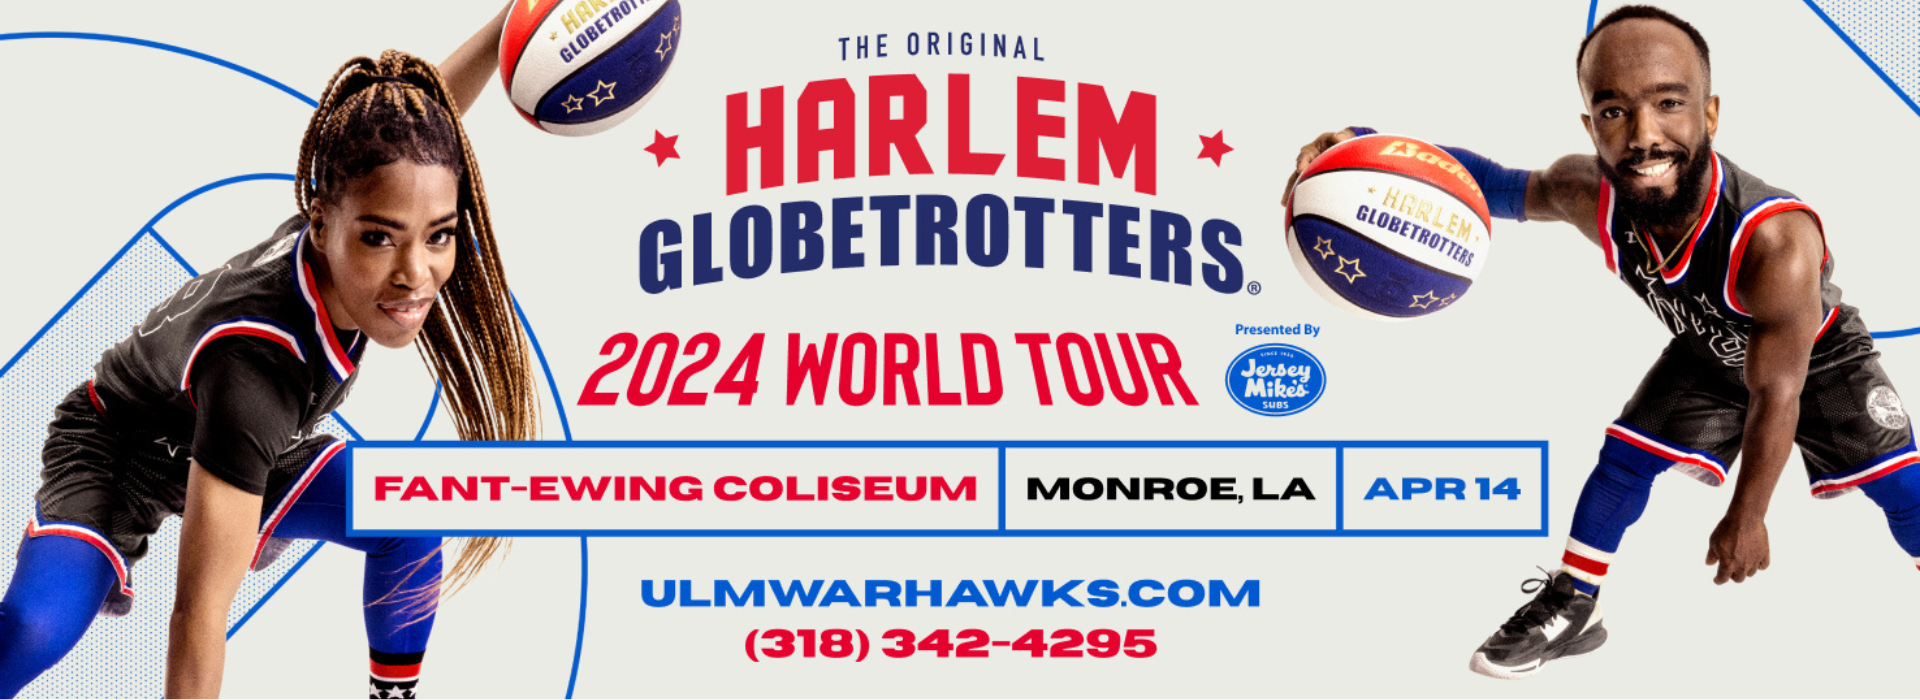 The 2024 Harlem Globetrotters World Tour is stopping at Fant-Ewing Coliseum on April 14!